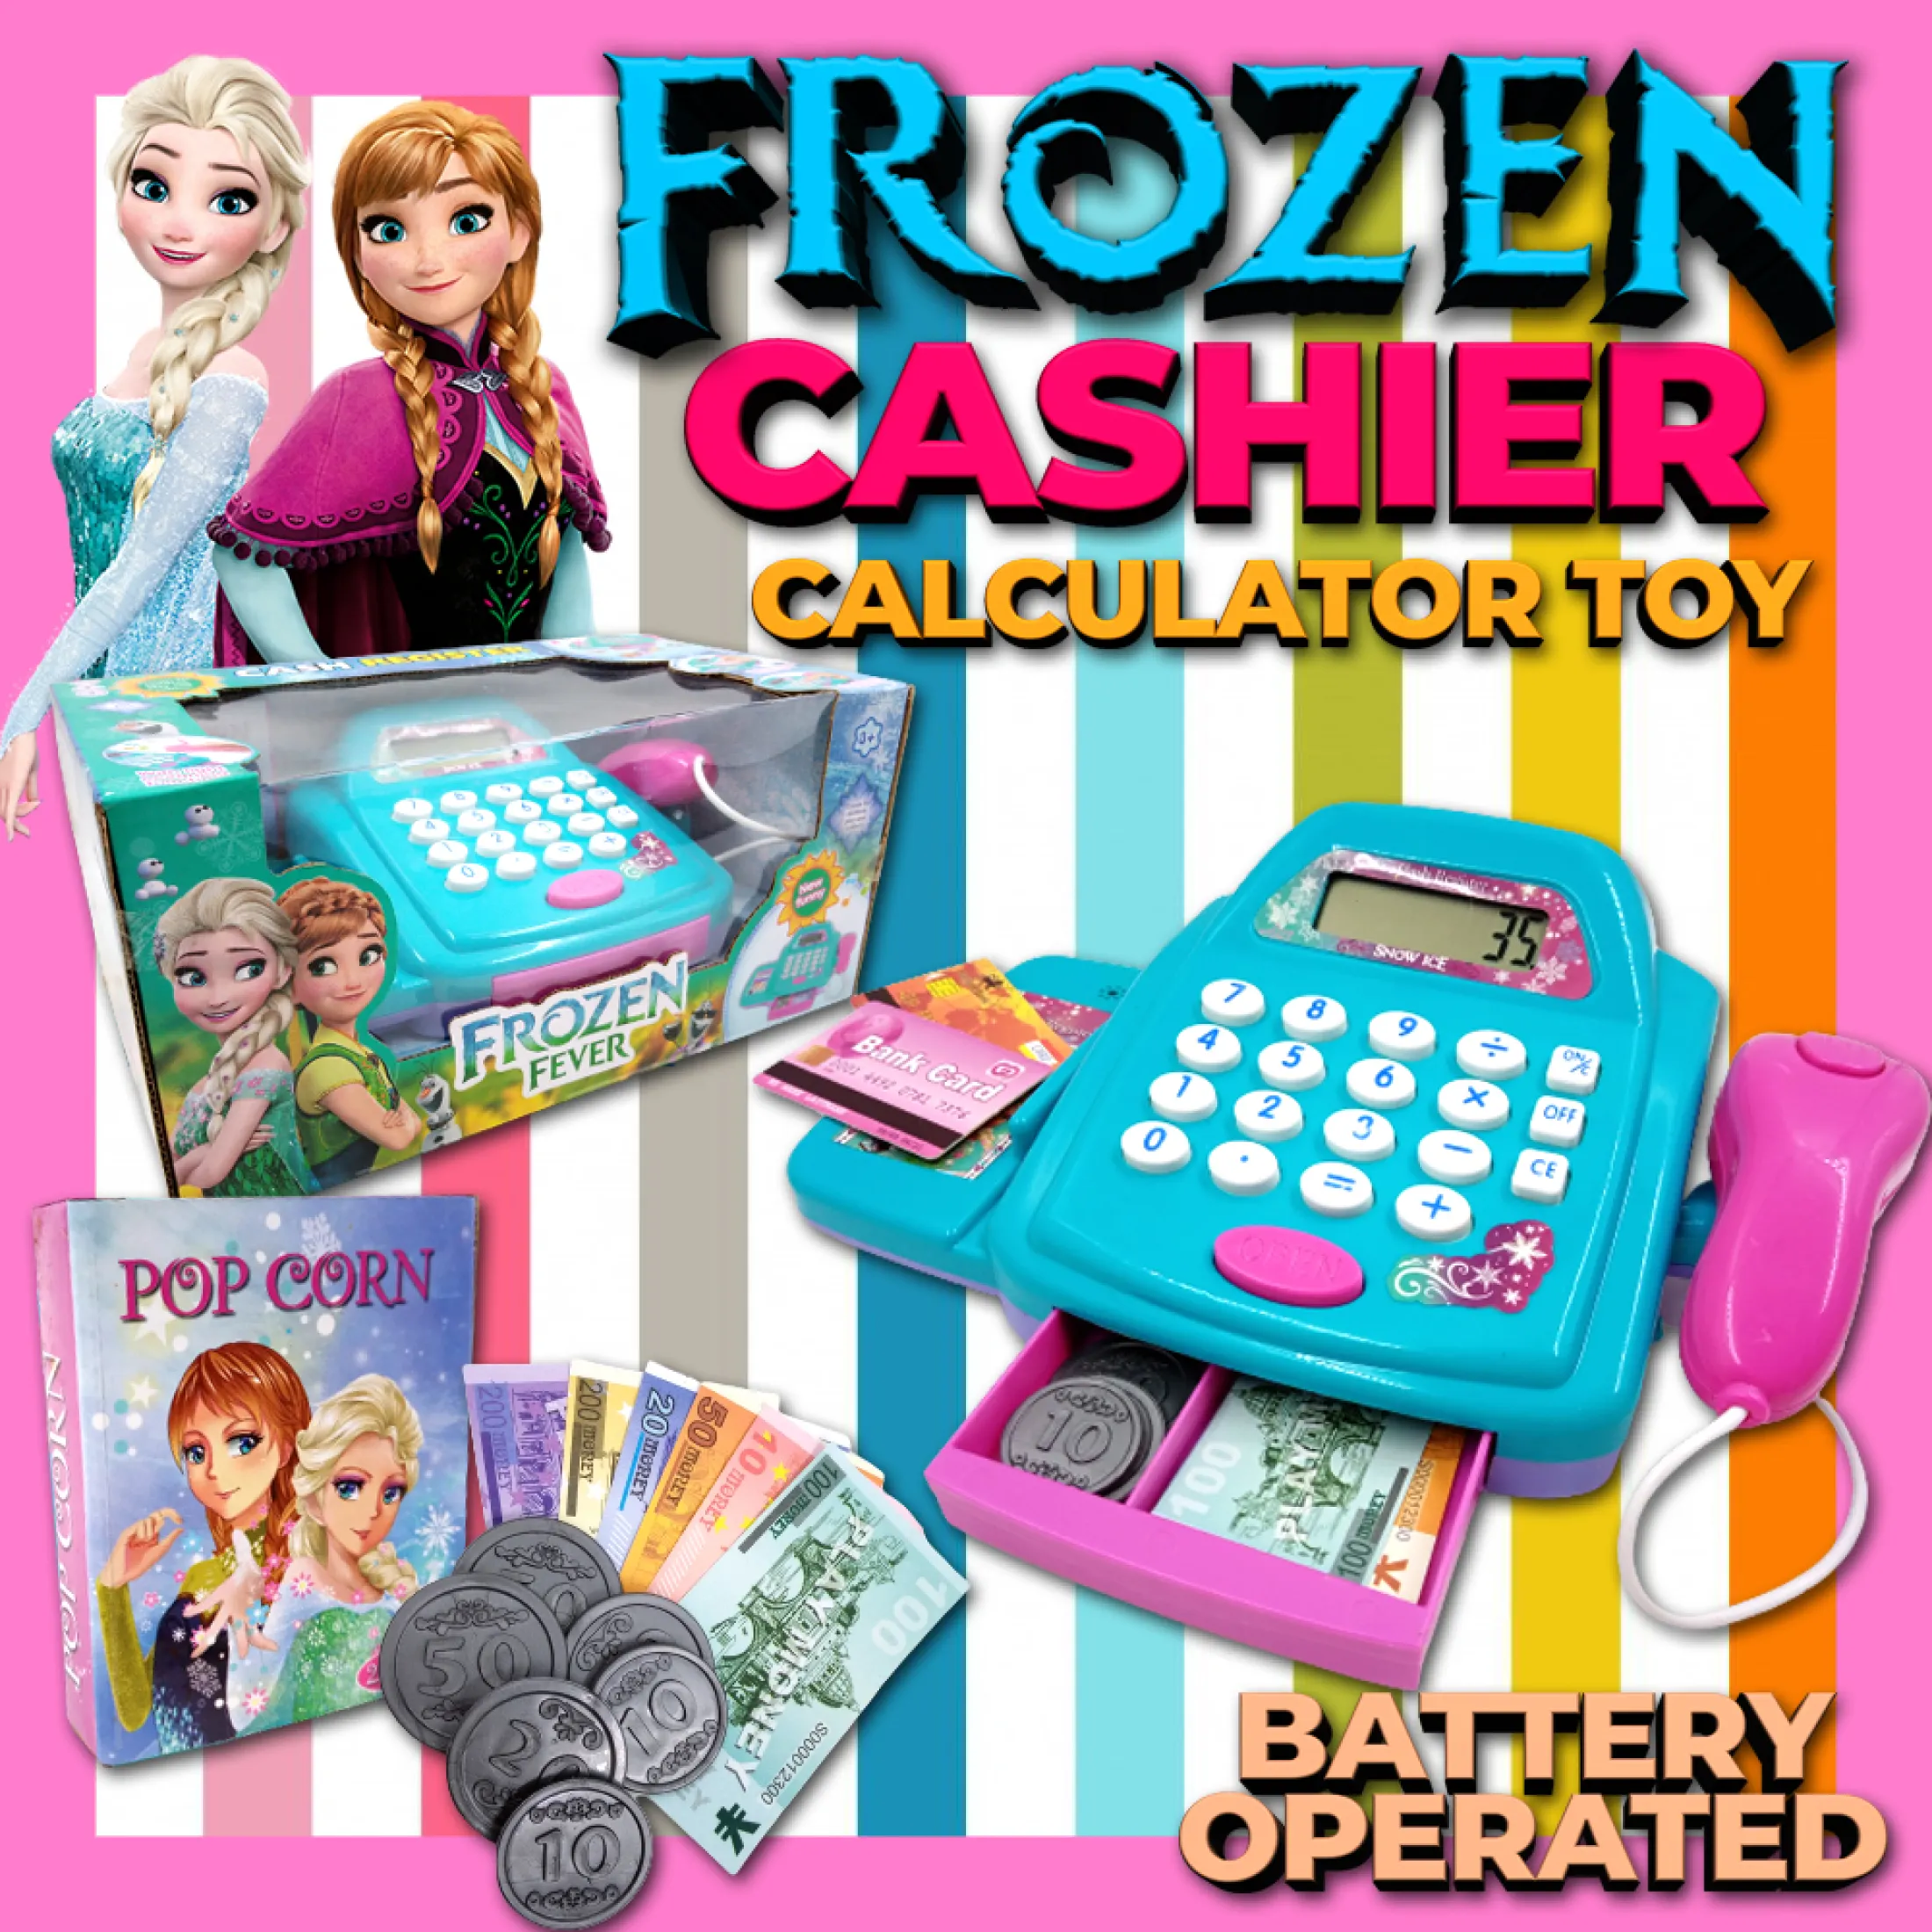 Frozen Cashier High Quality Calculator Toy Battery Operated With Lights And Sounds Toys For Kids Toys For Girls Lazada Ph